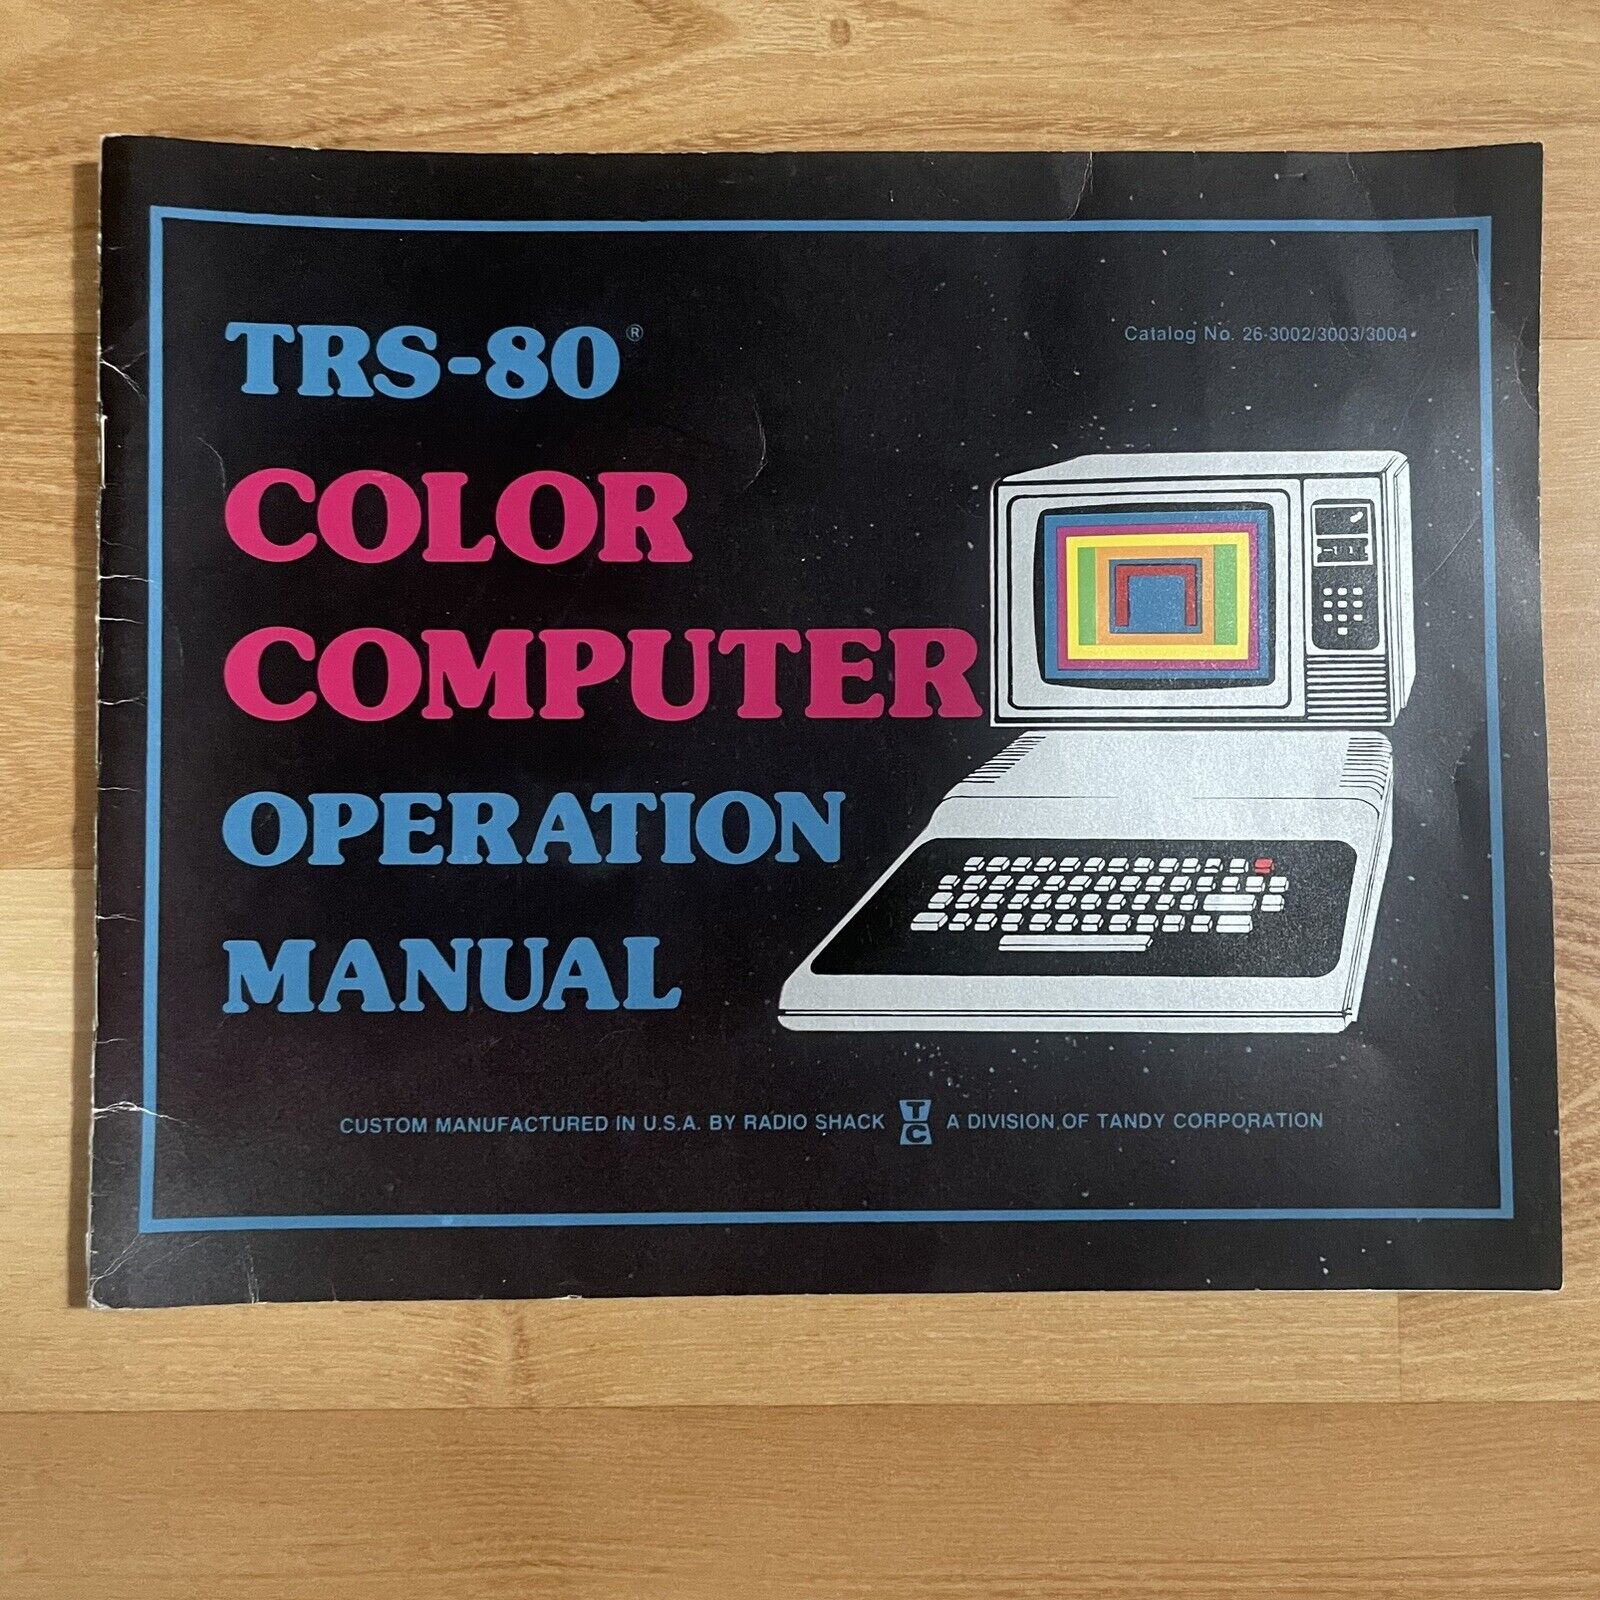 Vintage Tandy TRS-80 Color Computer Operation Manual 1980